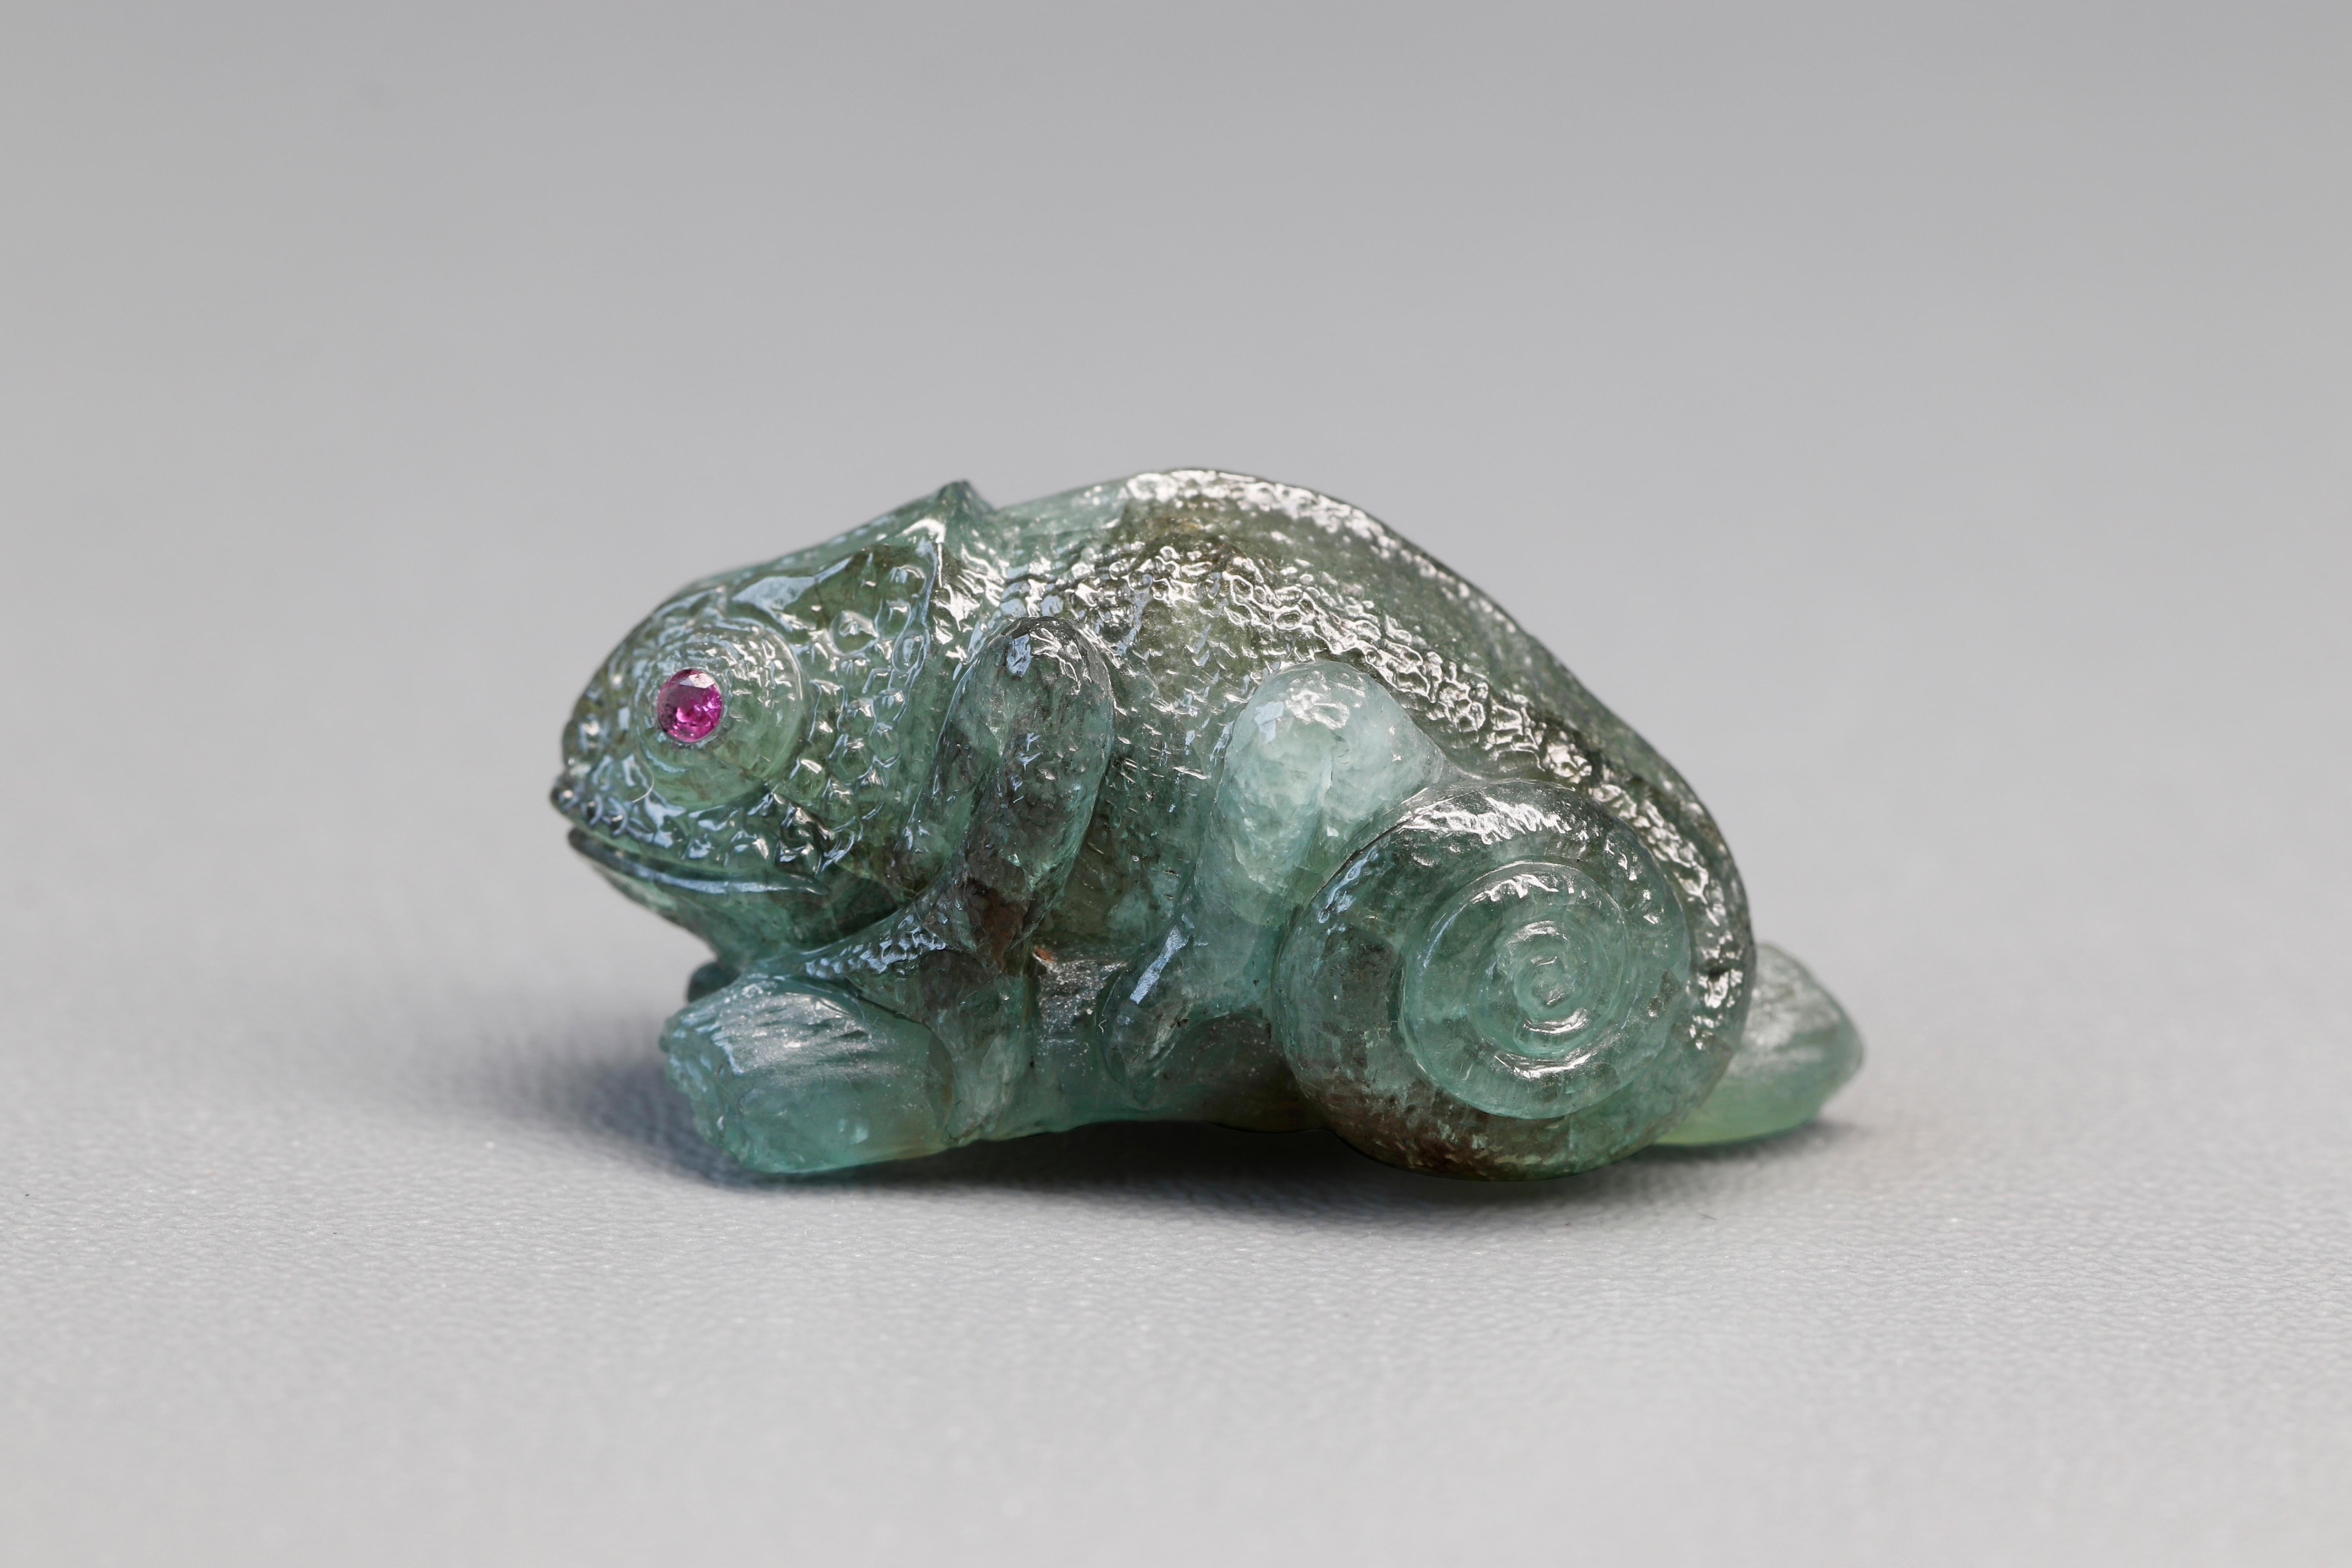 An extraordinary 48.02 ct Alexandrite carving, meticulously shaped into the form of a chameleon. Alexandrite, known for its remarkable color-changing properties, holds a rich historical significance. Discovered in the Ural Mountains of Russia in the